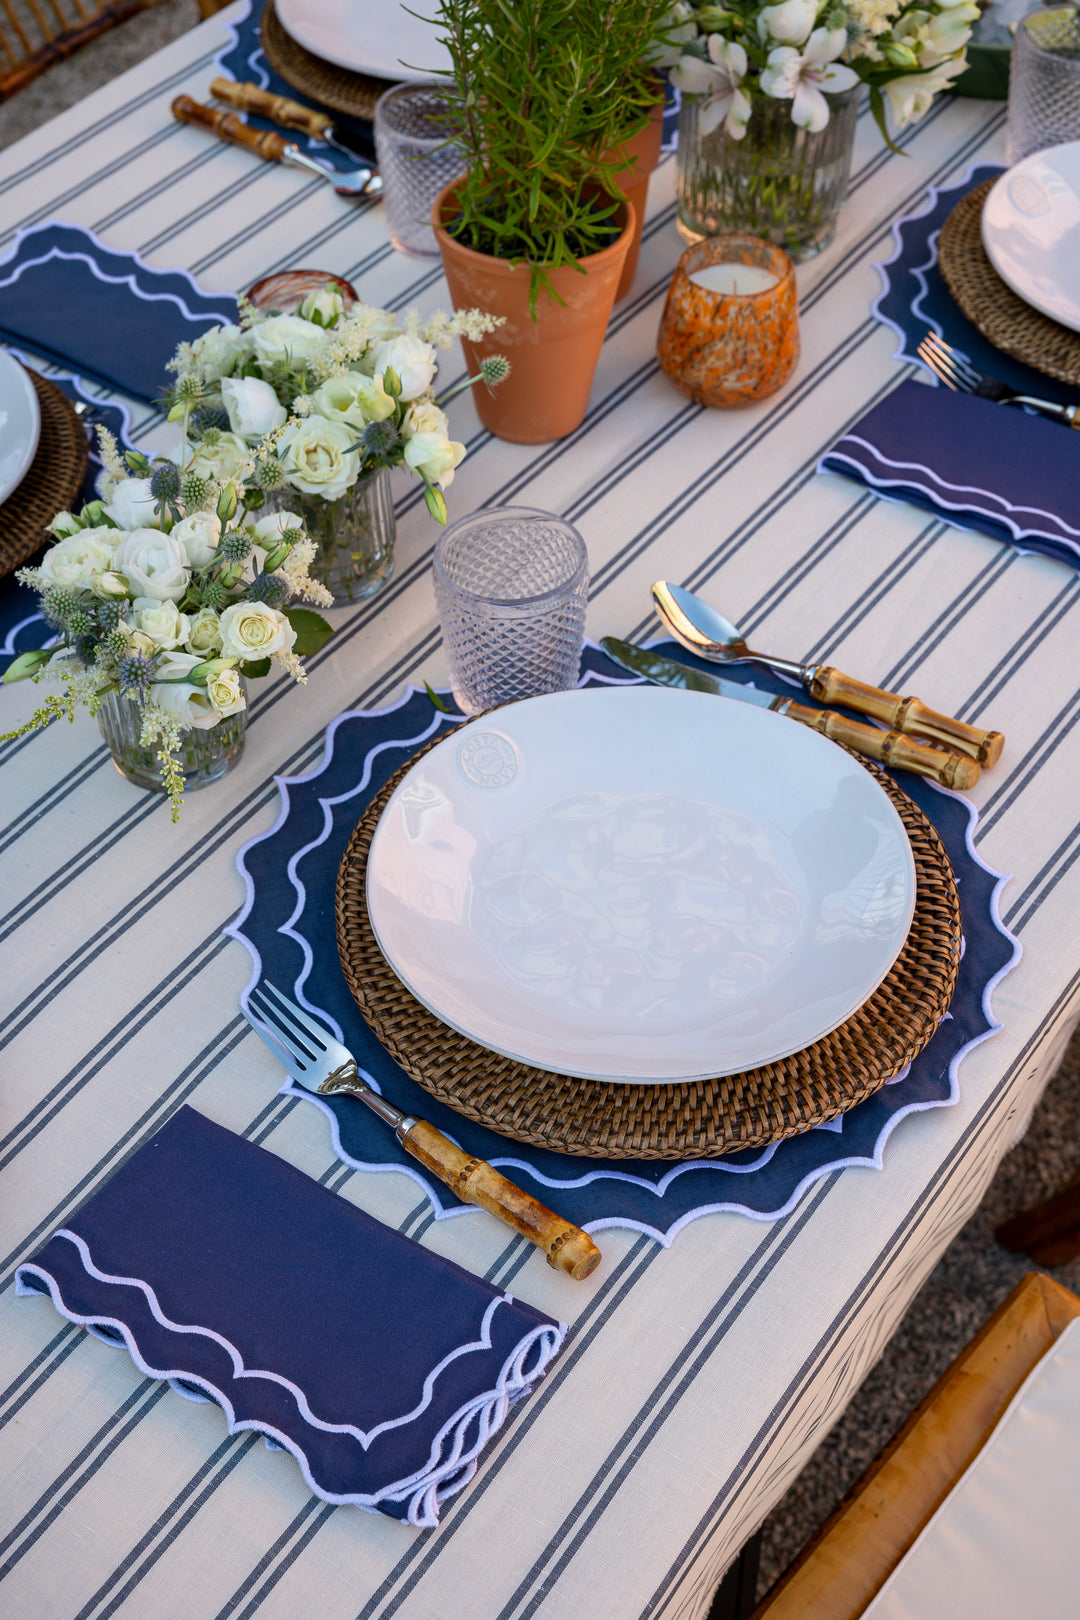 Scalloped Linen Placemat - Navy & White